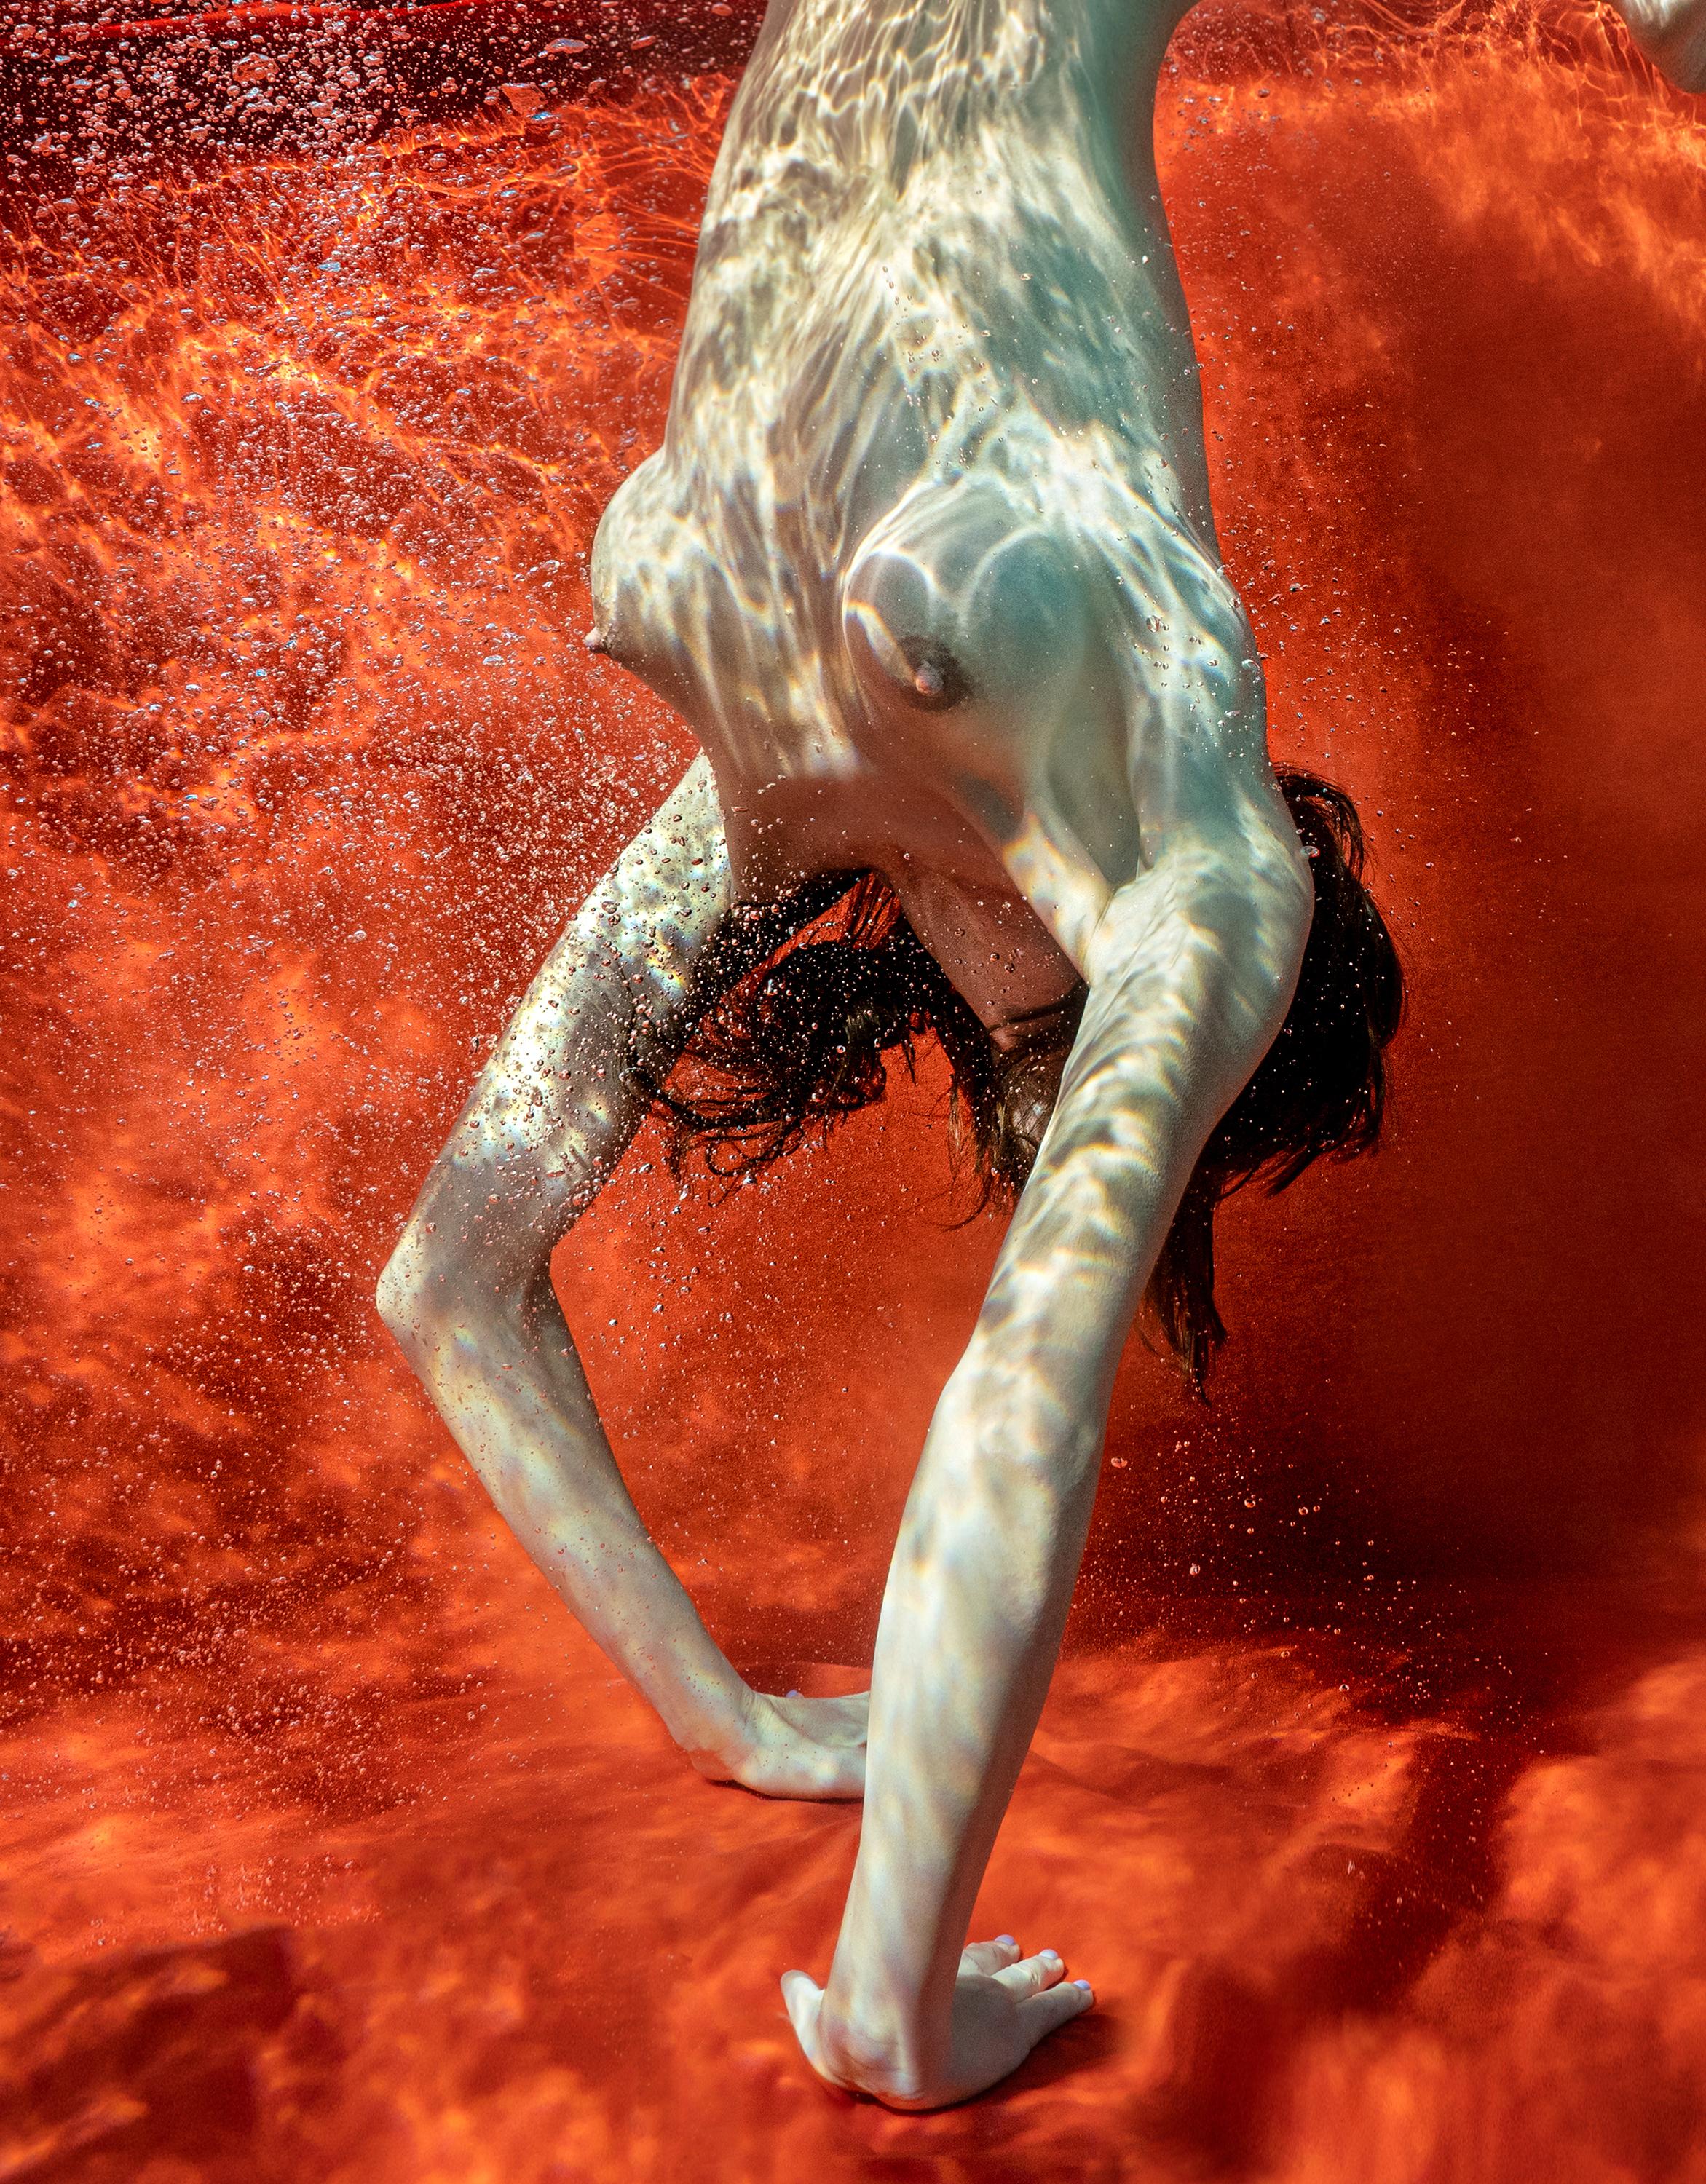 Blood and Milk VIII - underwater nude photograph - archival pigment print 24x18